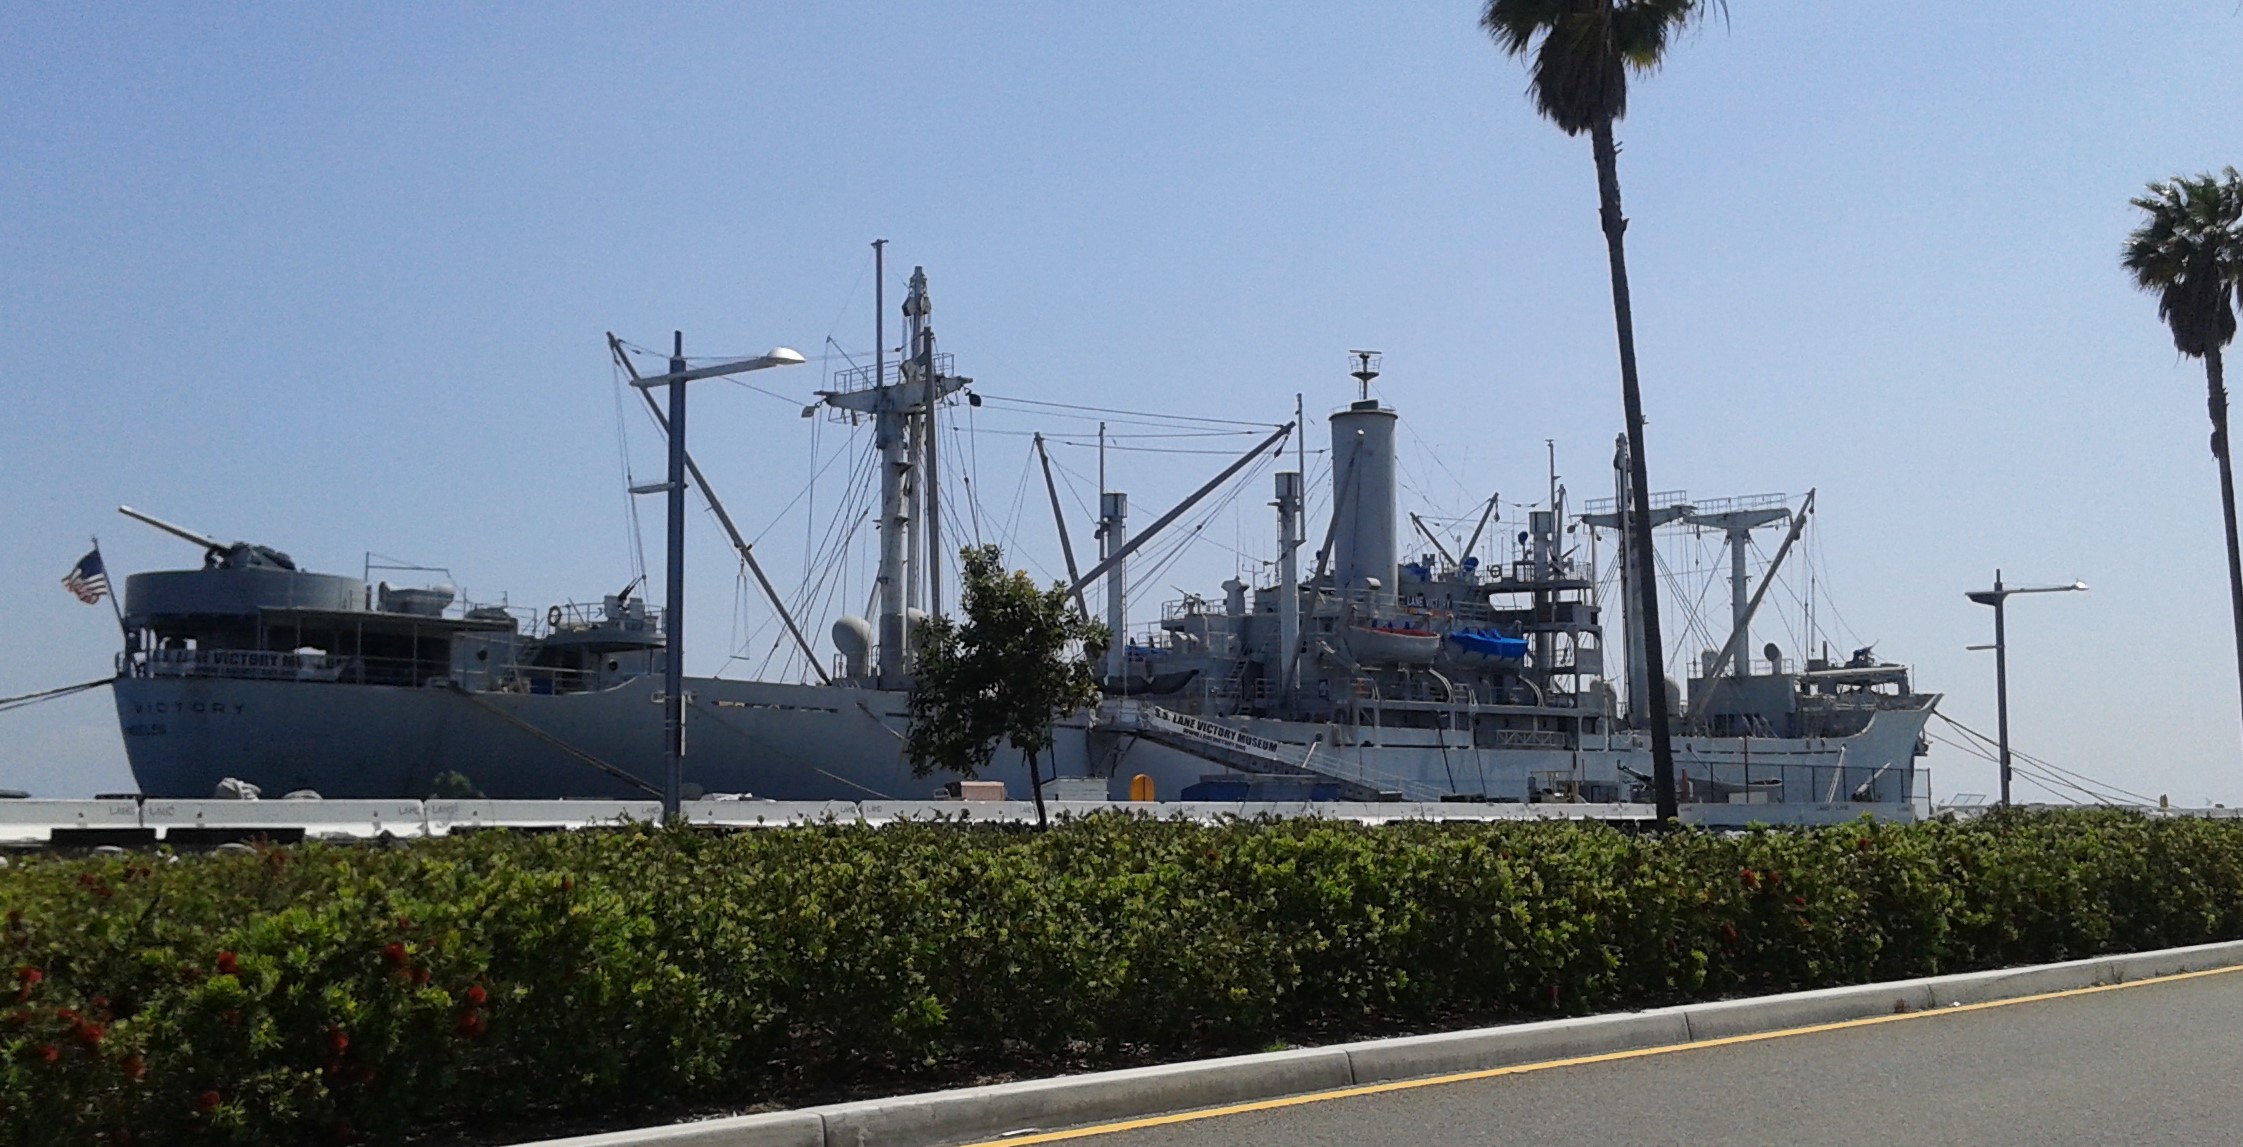 SS Lane Victory berth 49 at the foot of Miner Street / Dave Arien Way in San Pedro.